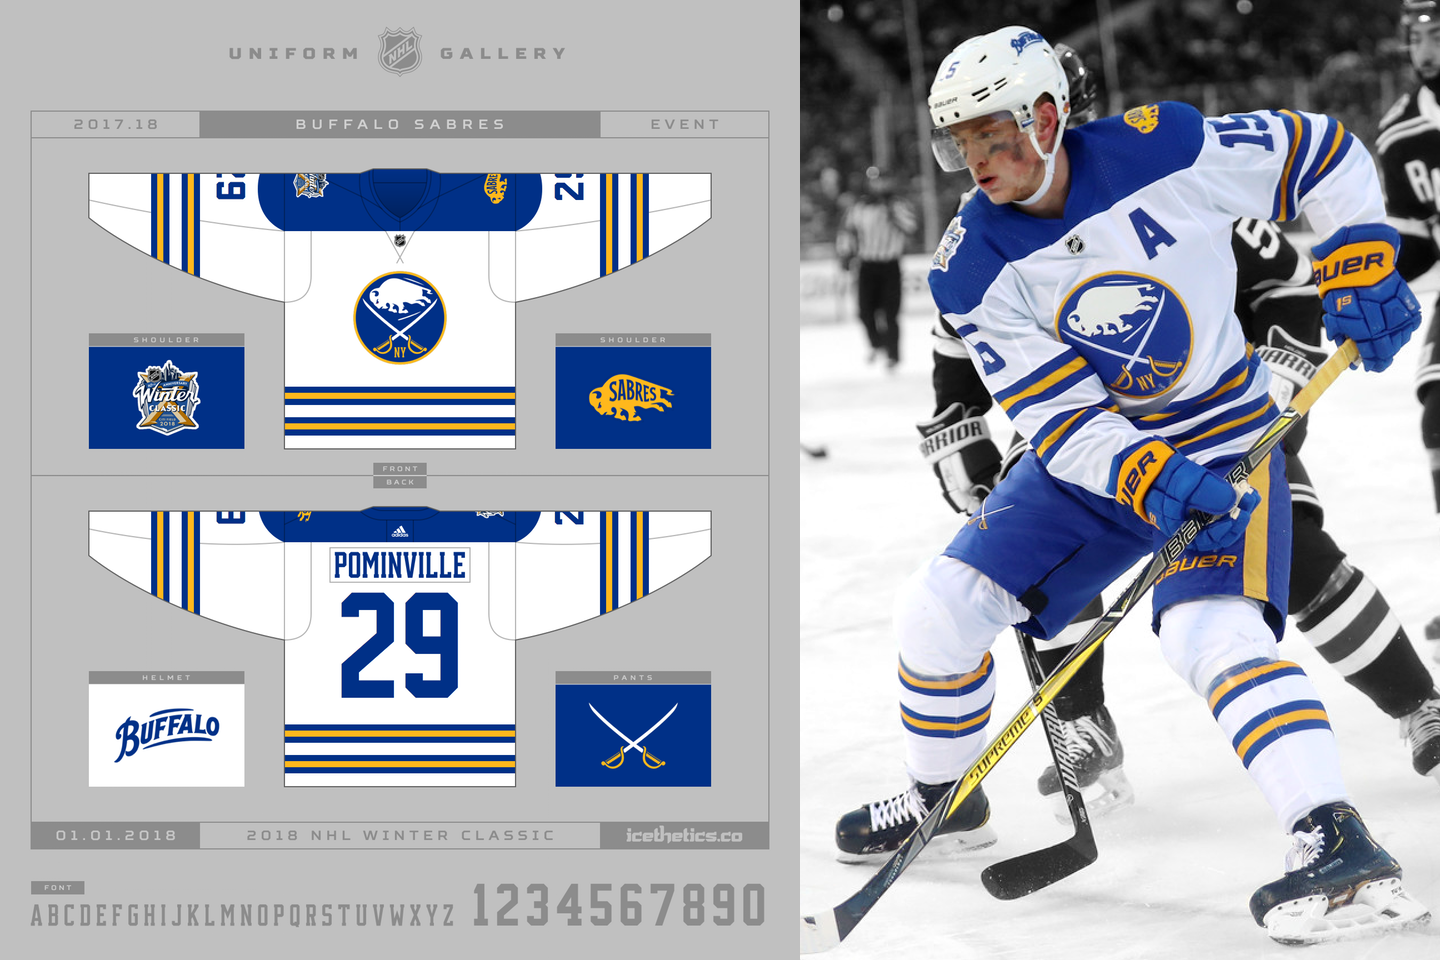 Here are all the custom jerseys for the NHL's 2017-18 outdoor